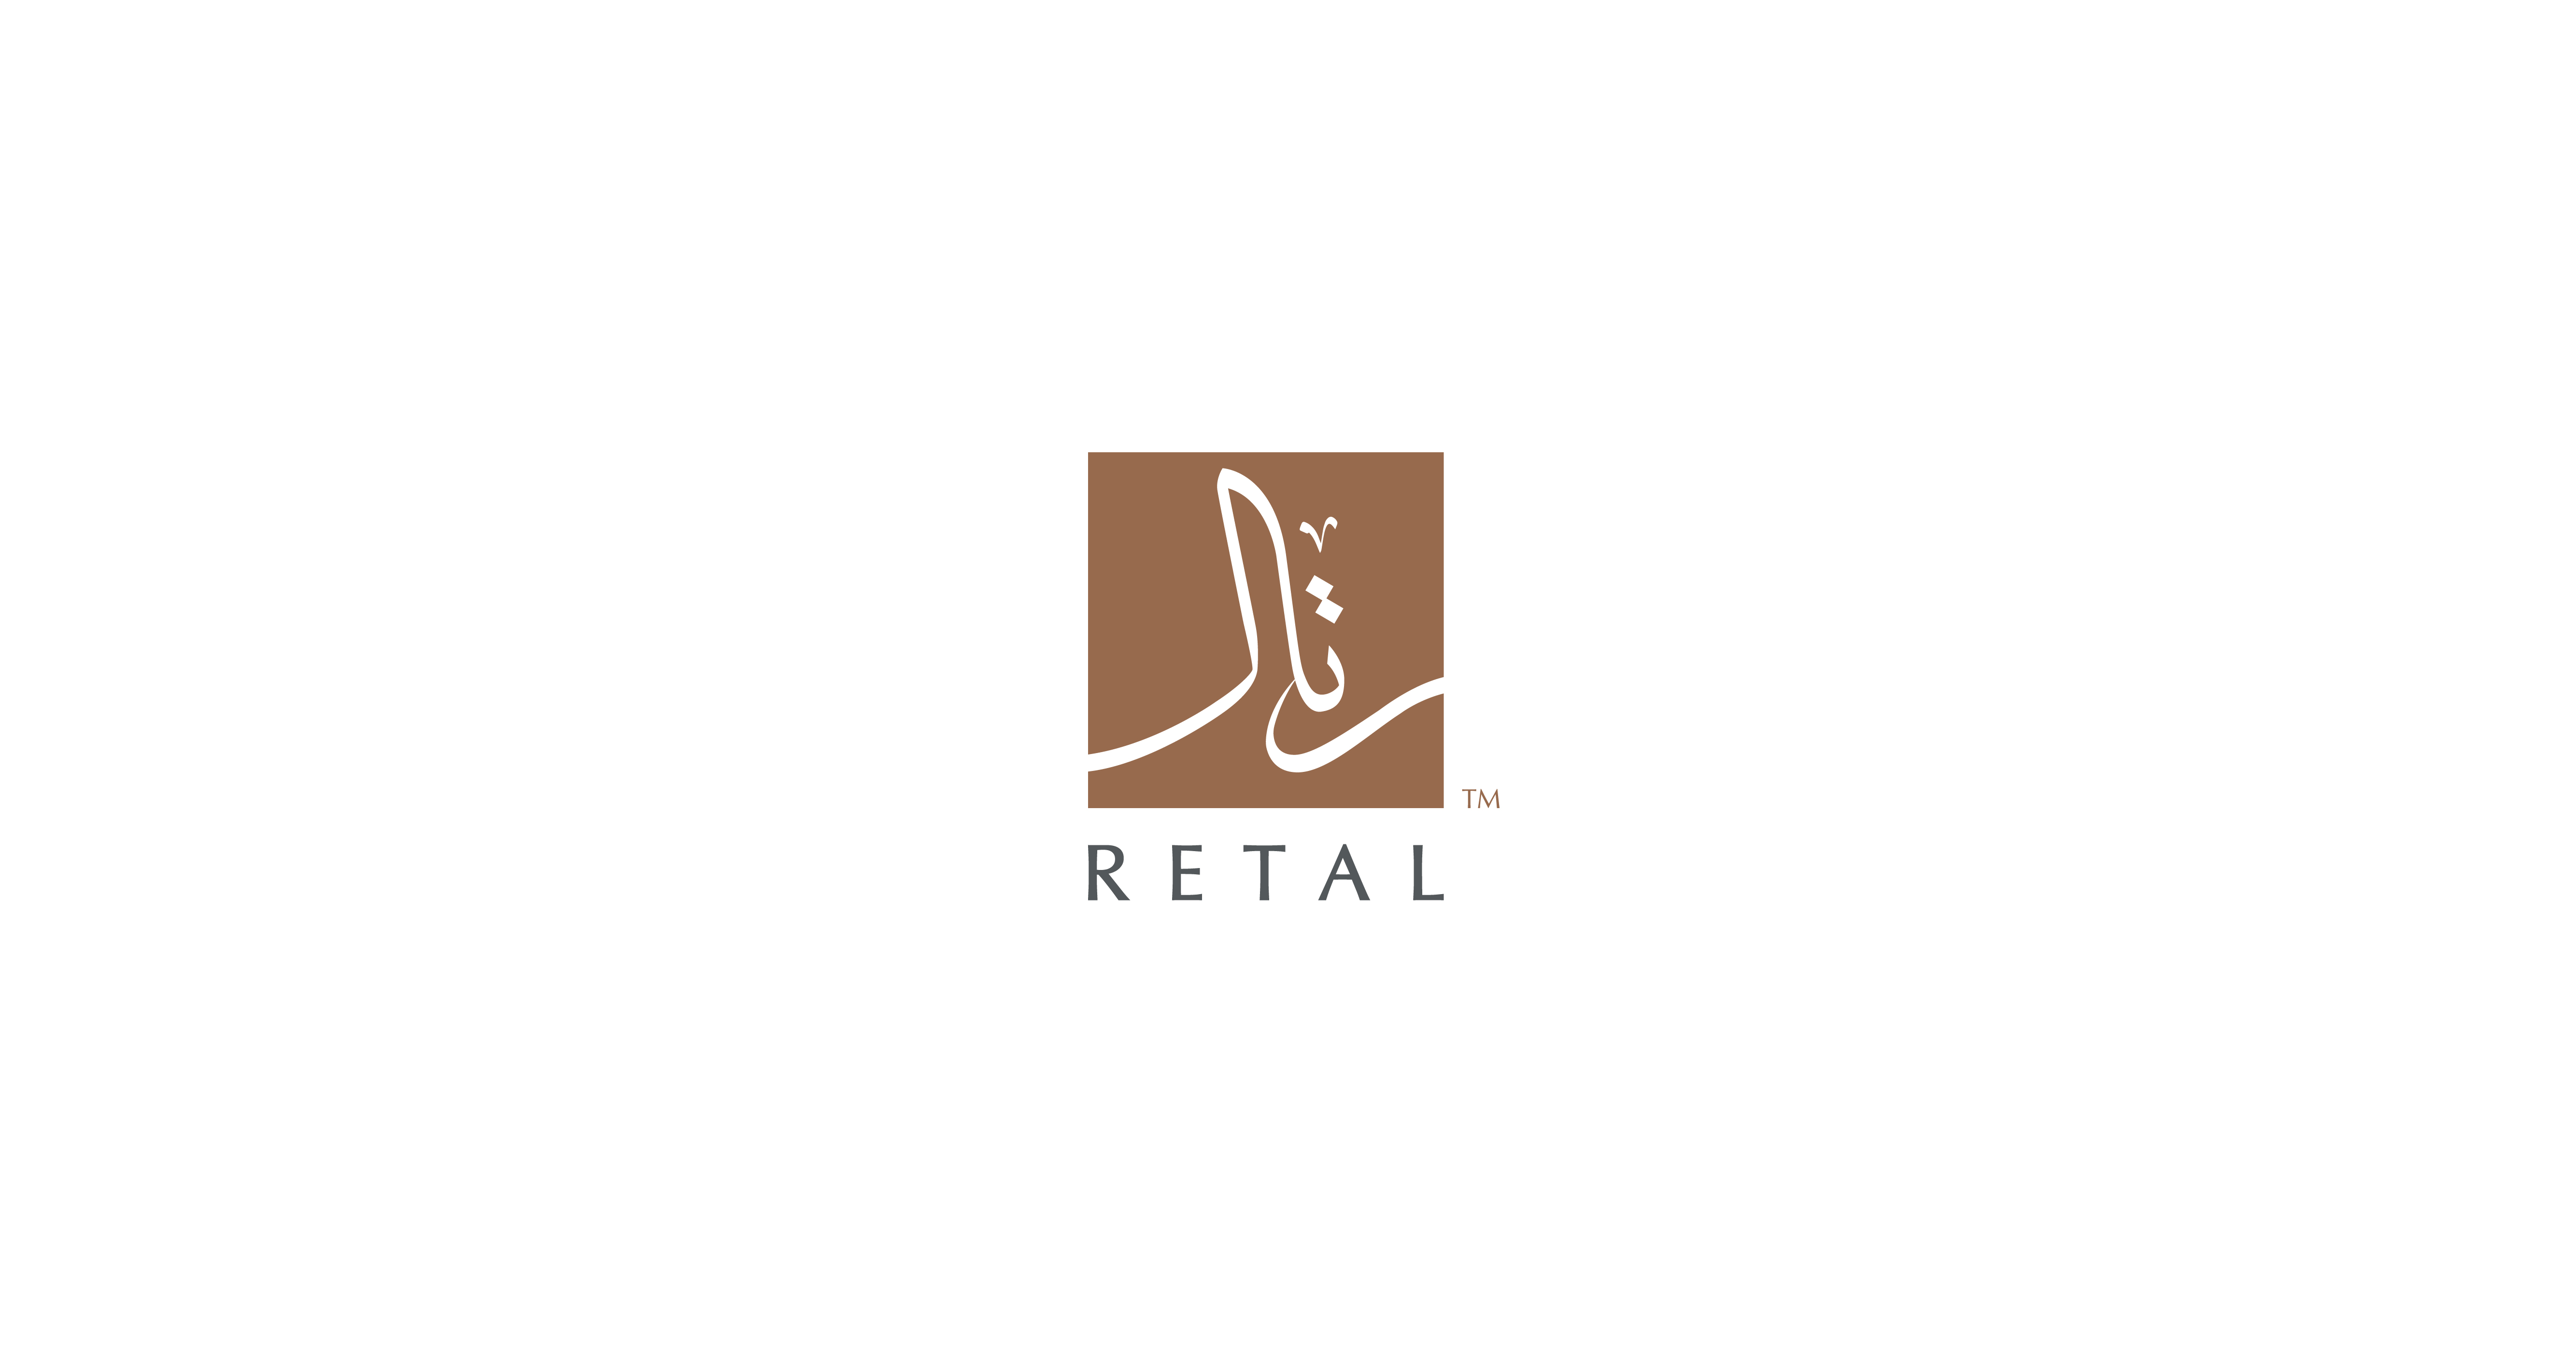 Retal Allocates 30% Shares for Public Subscription following CMA Approval